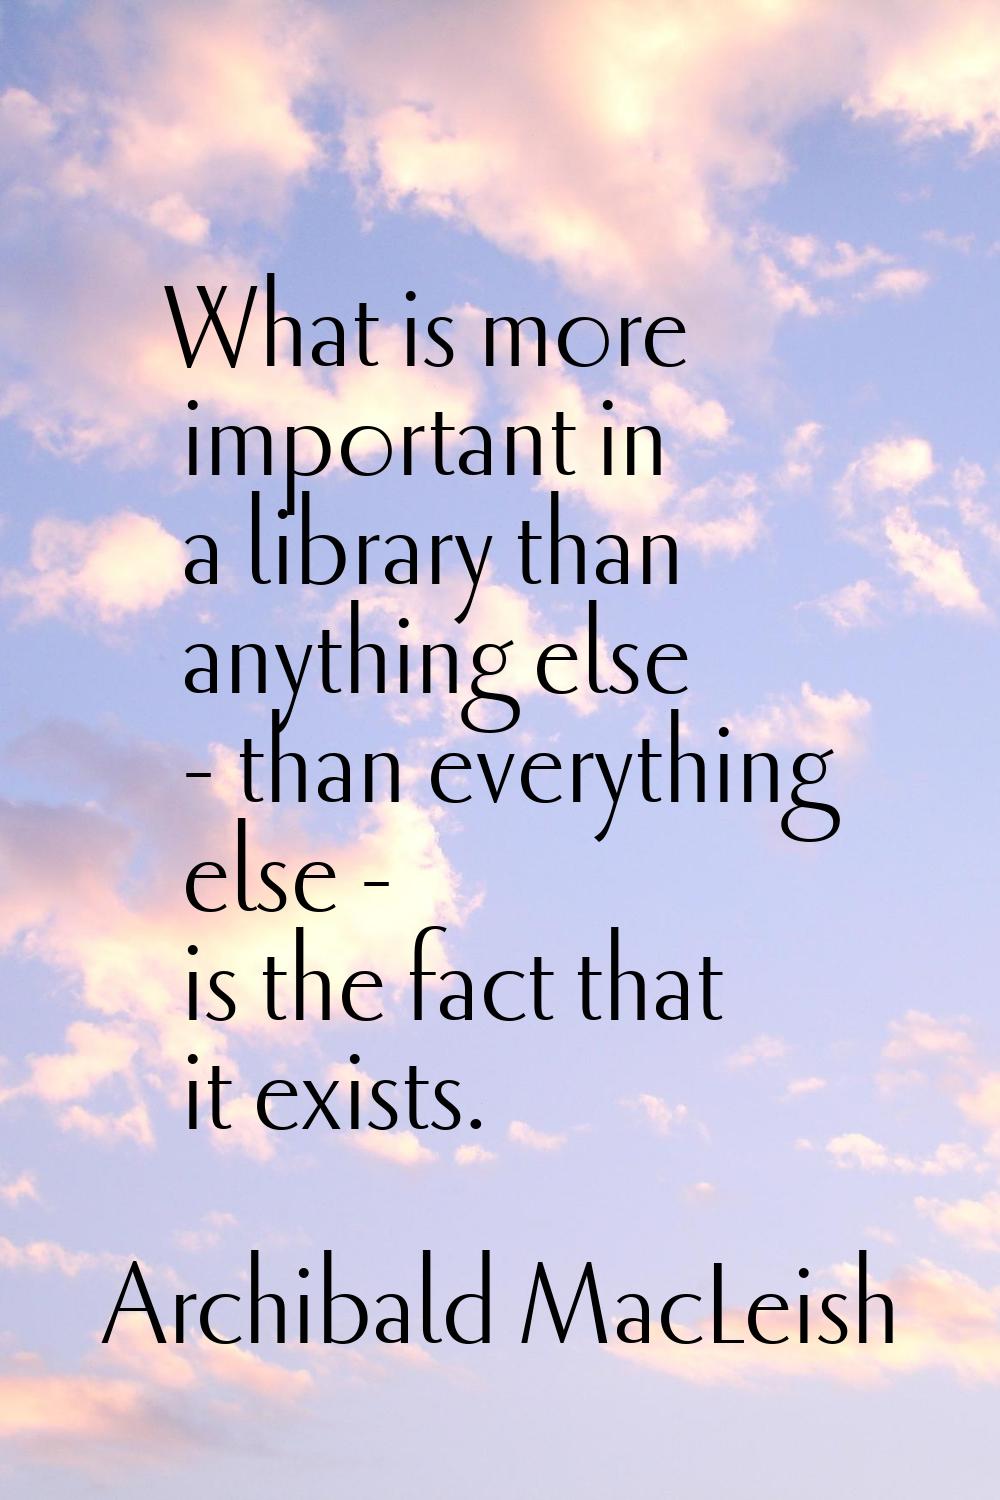 What is more important in a library than anything else - than everything else - is the fact that it